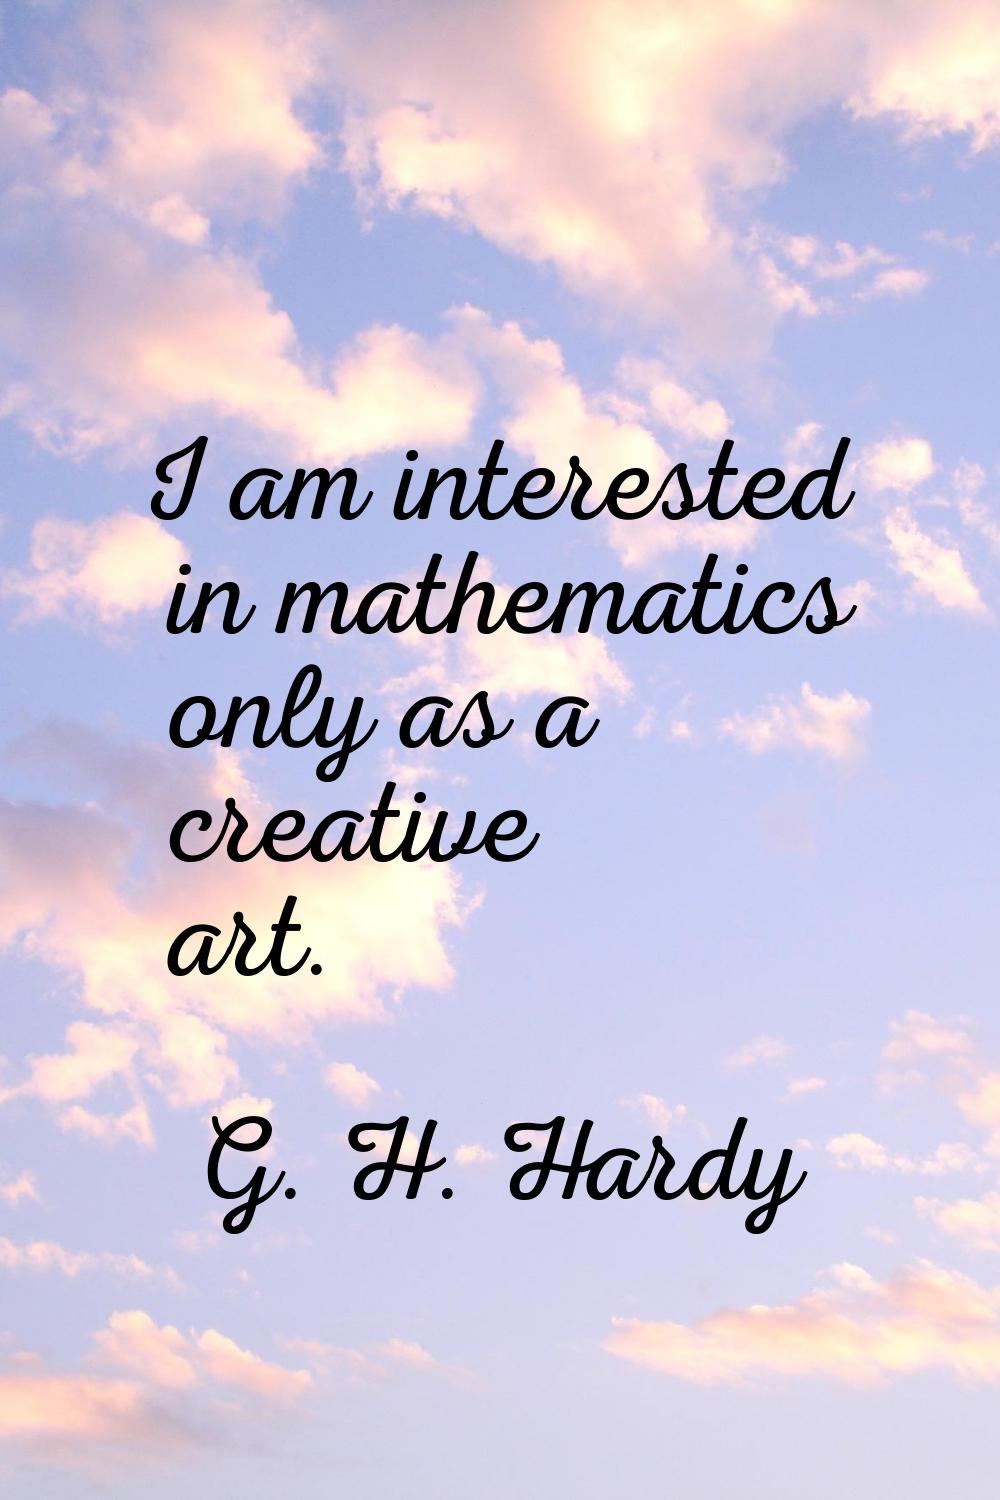 I am interested in mathematics only as a creative art.